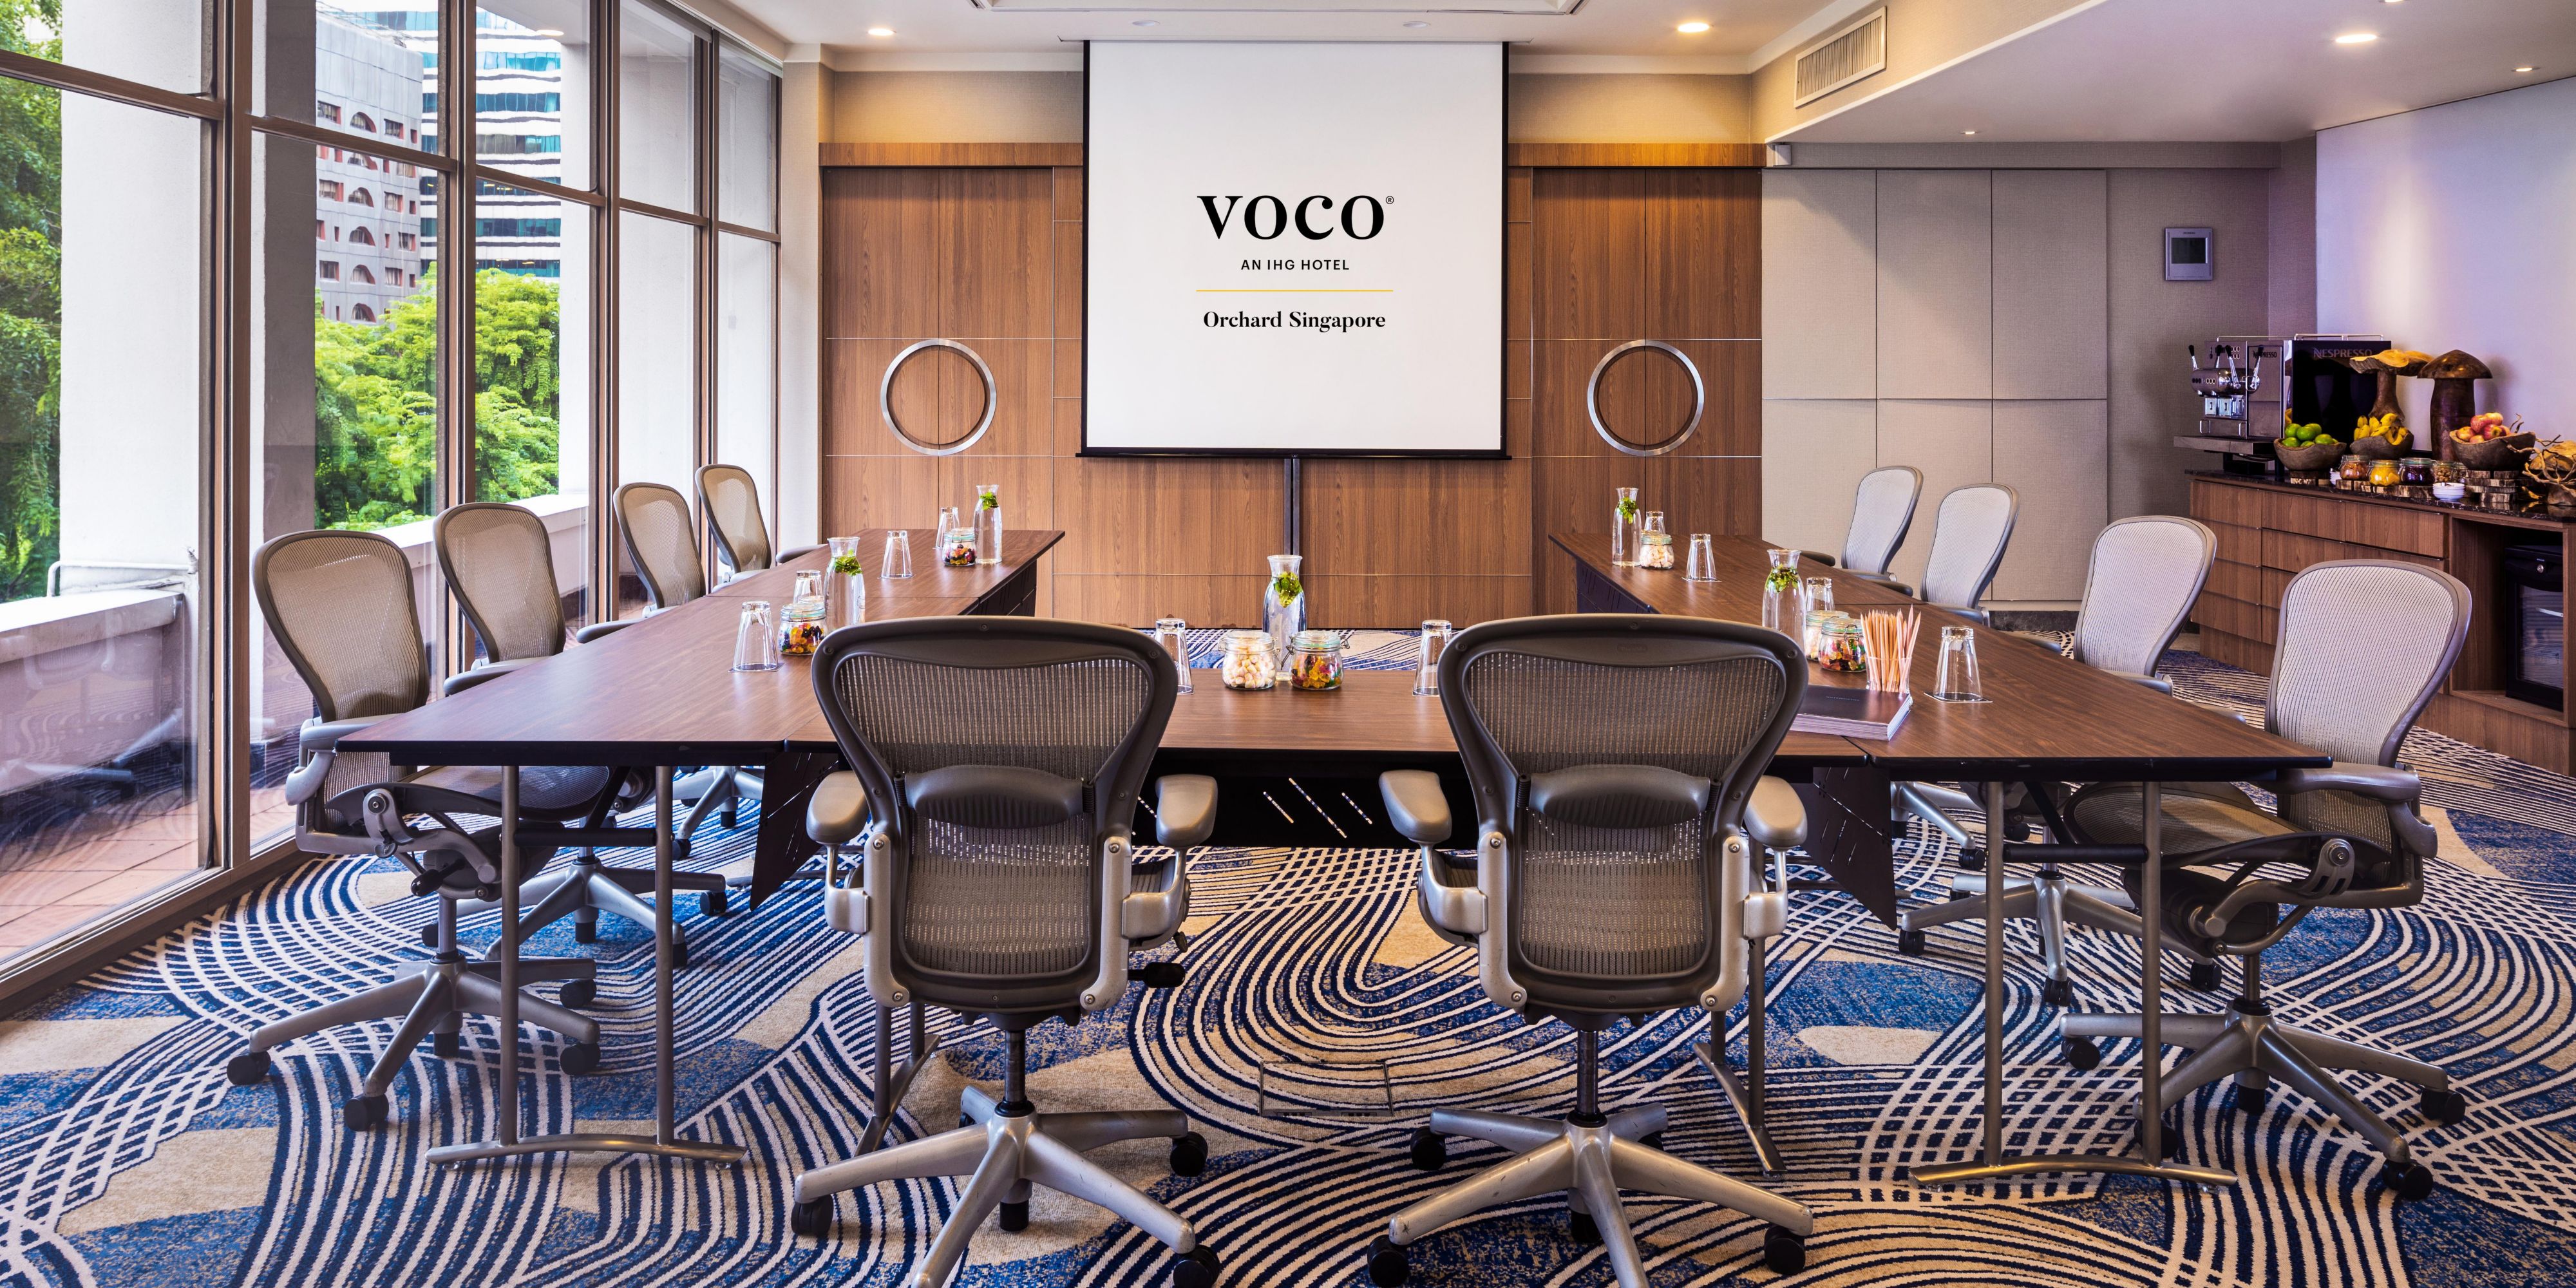 Find the perfect venue for your conference in our smart, versatile meeting rooms. We've got all the latest tech and stylish menus tailored to any event. Let our welcoming hosts make your experience stress - free from start to finish.